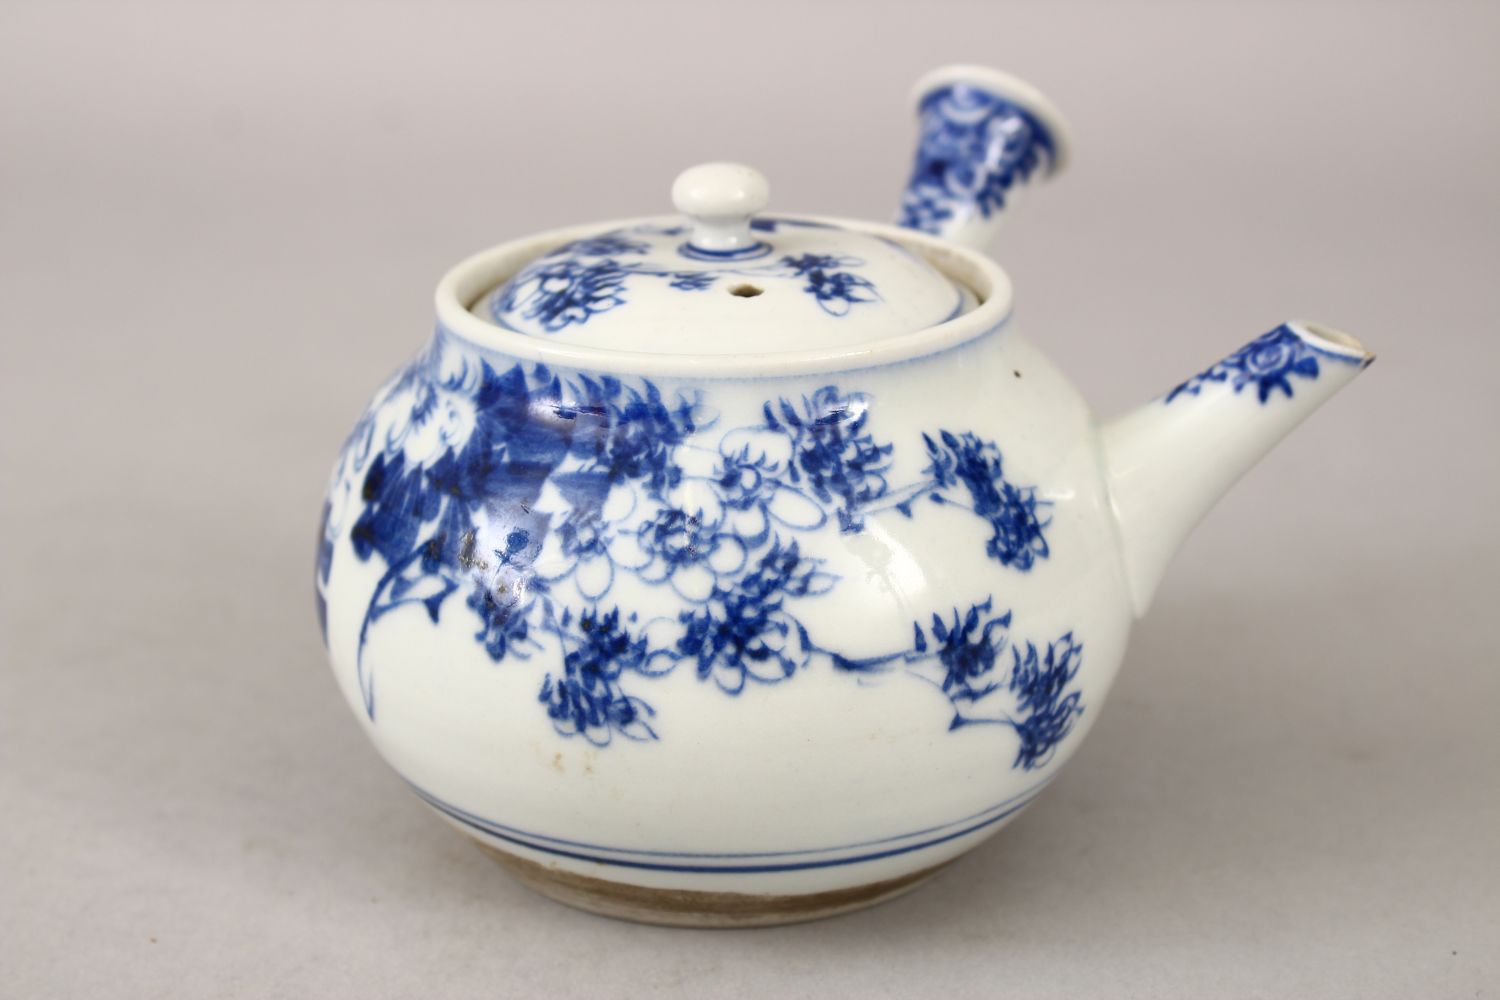 A 19TH CENTURY JAPANESE BLUE & WHITE PORCELAIN SAKE POT / TEA POT, decorated with native scenes of - Image 3 of 5